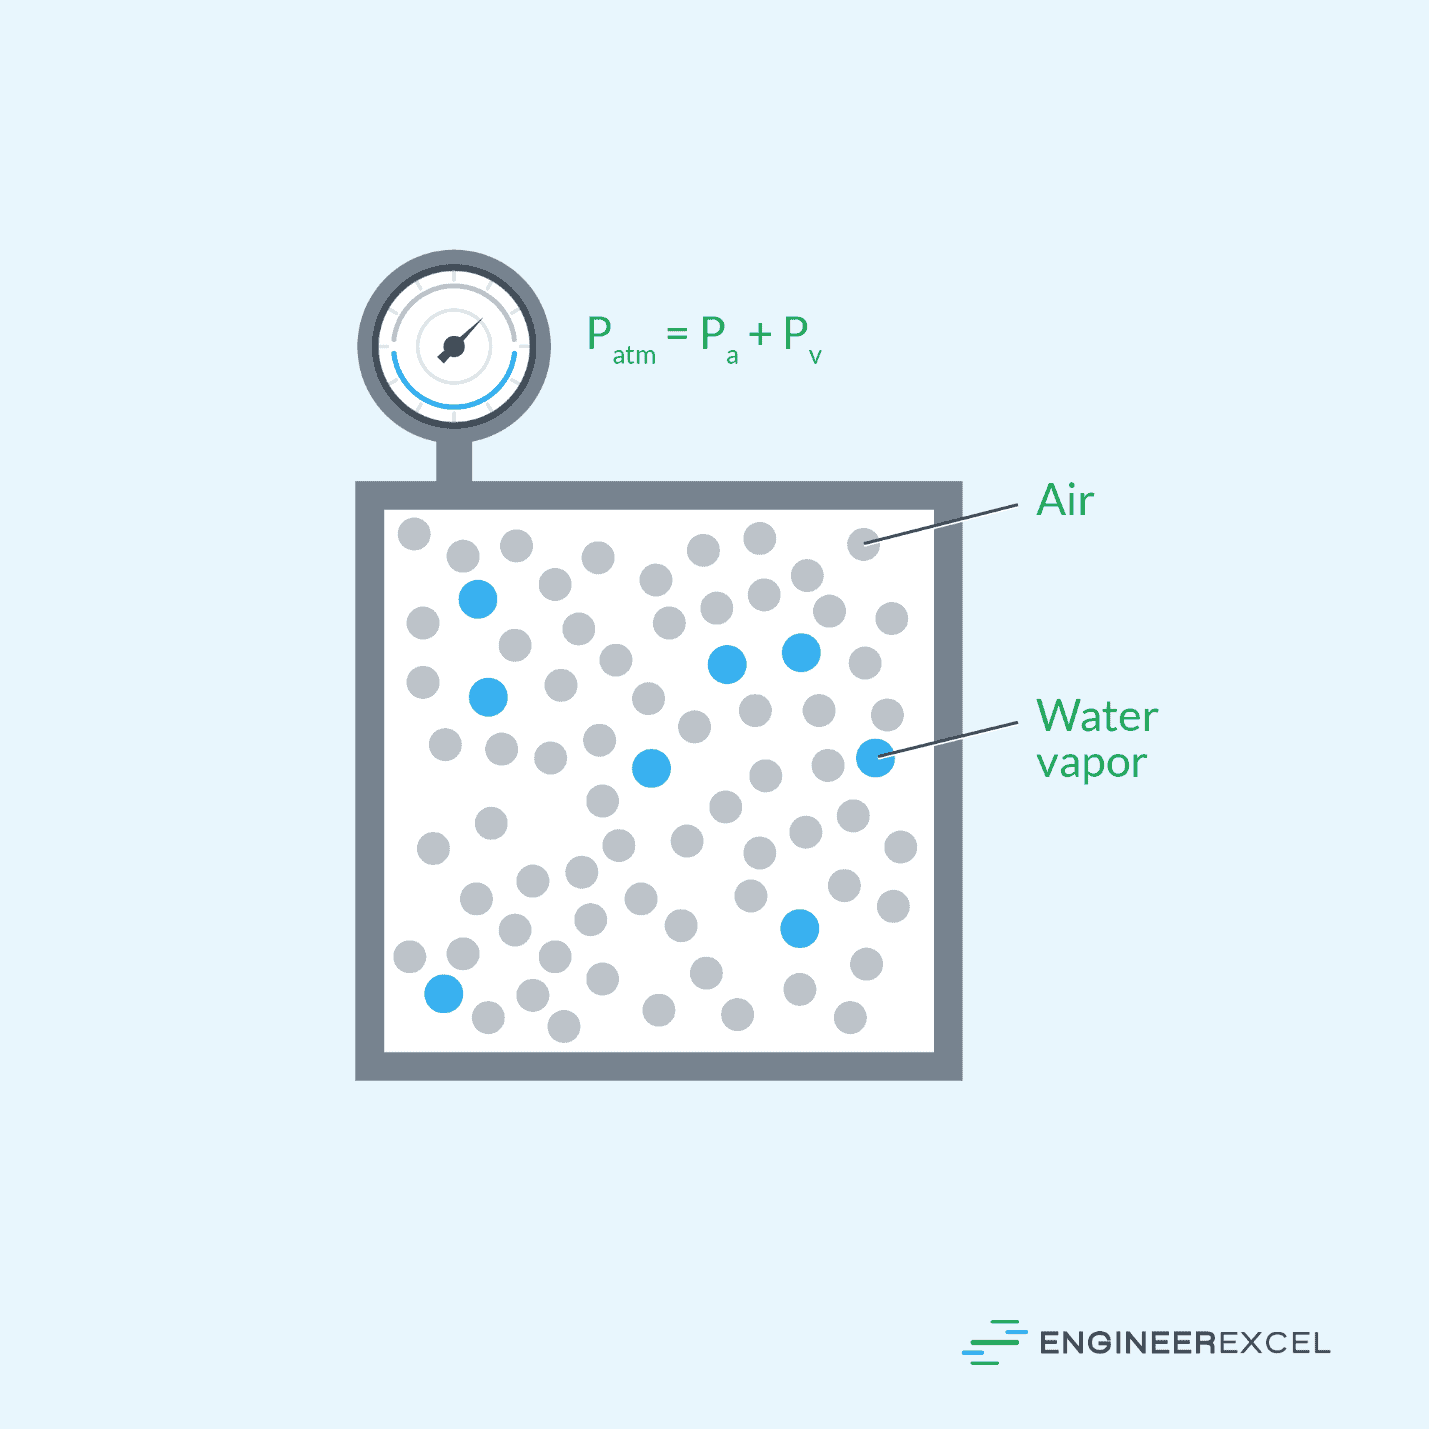 The atmospheric pressure as a combination of the partial pressures of air and water vapor